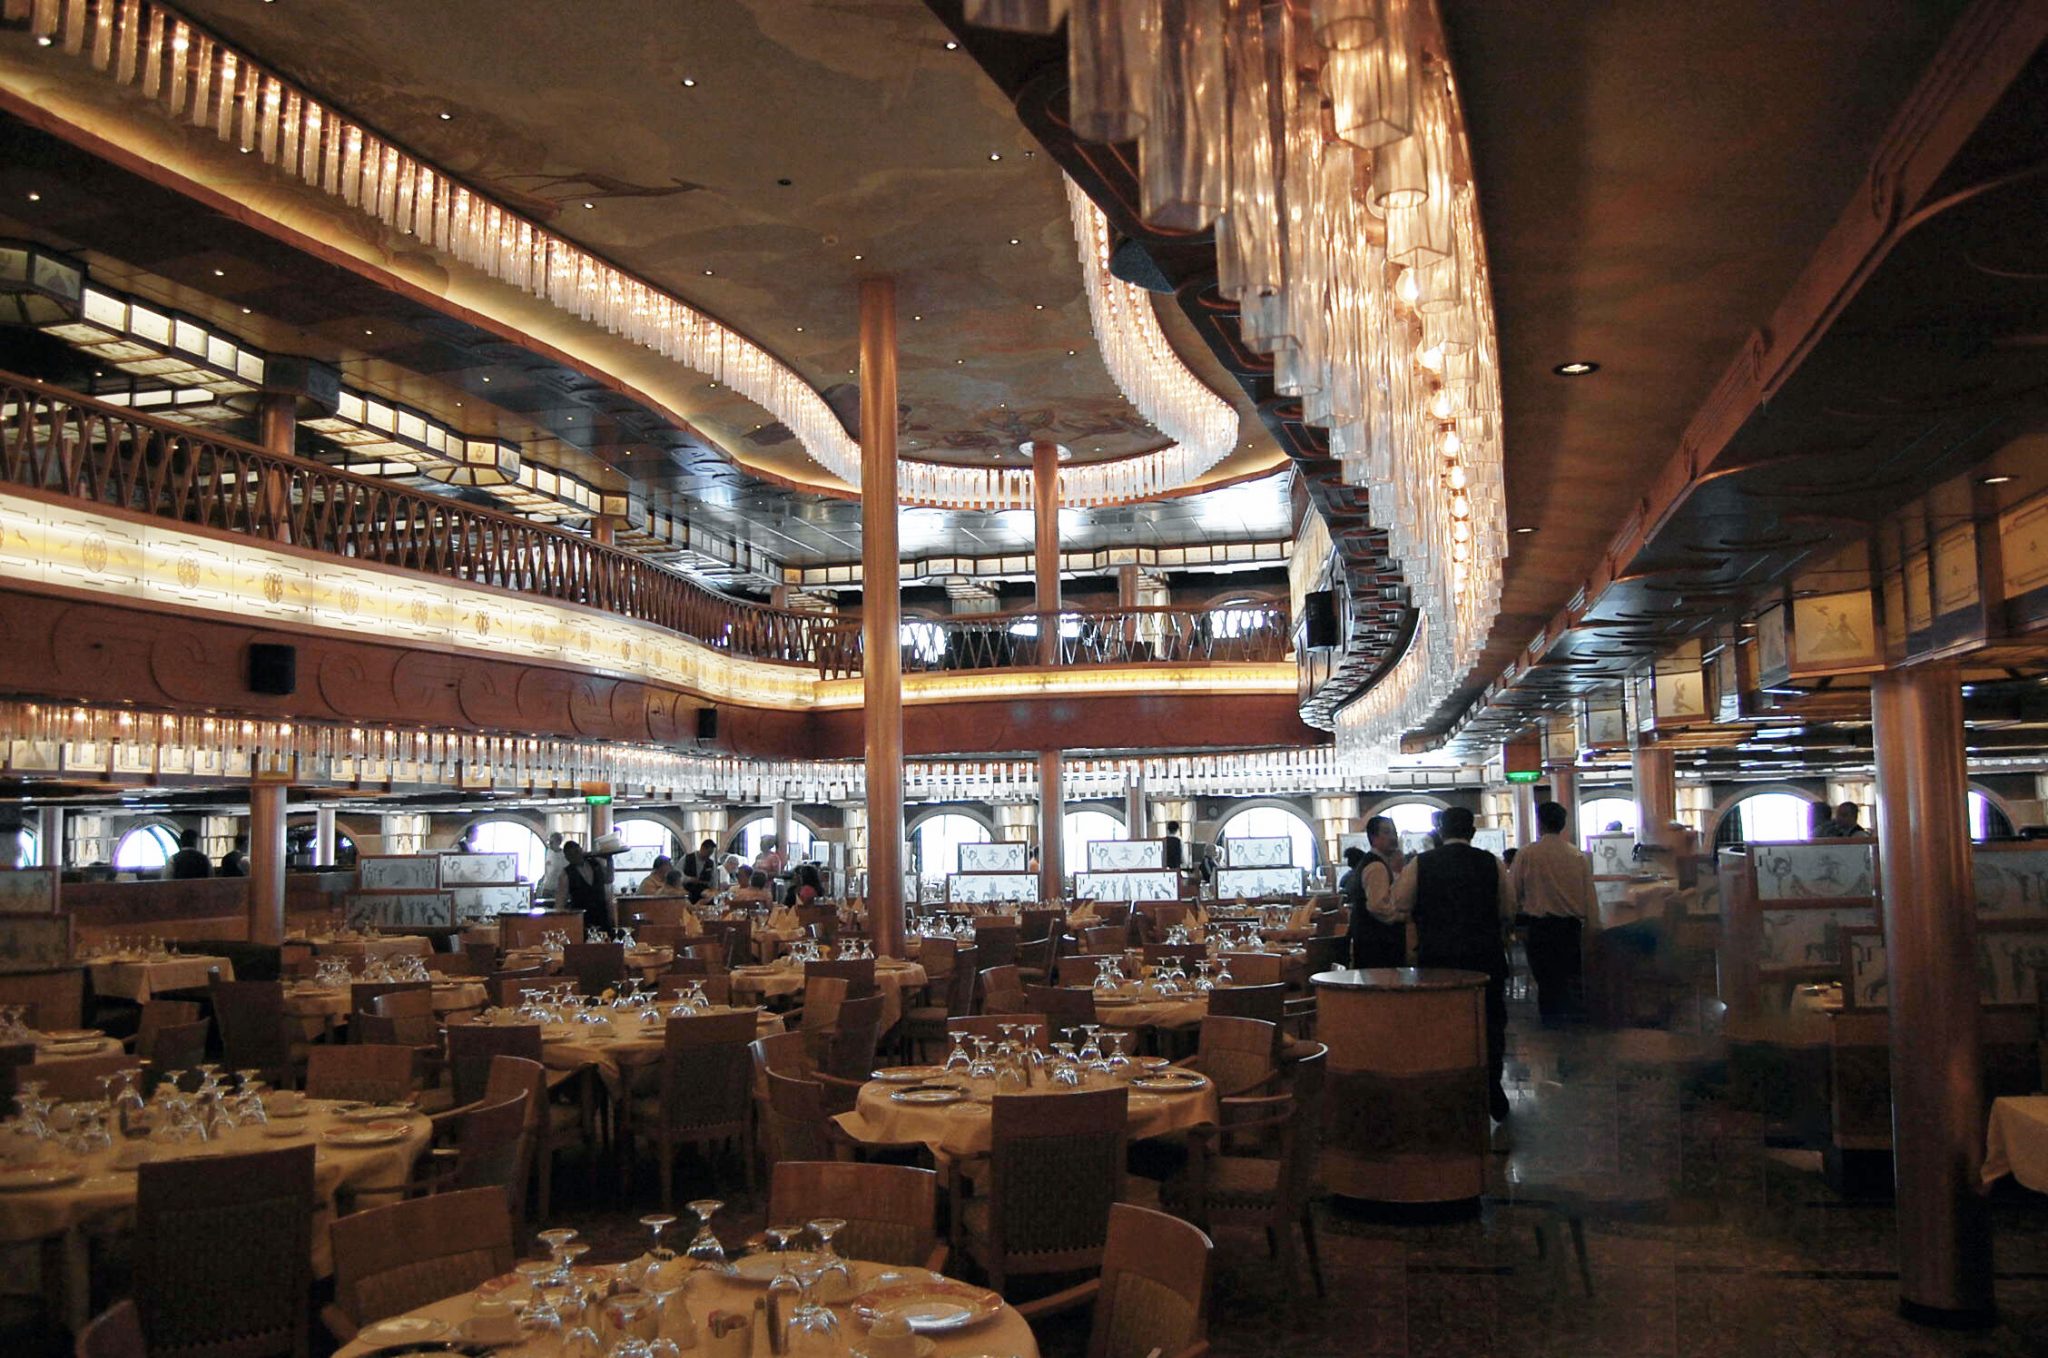 carnival pride dining room layout